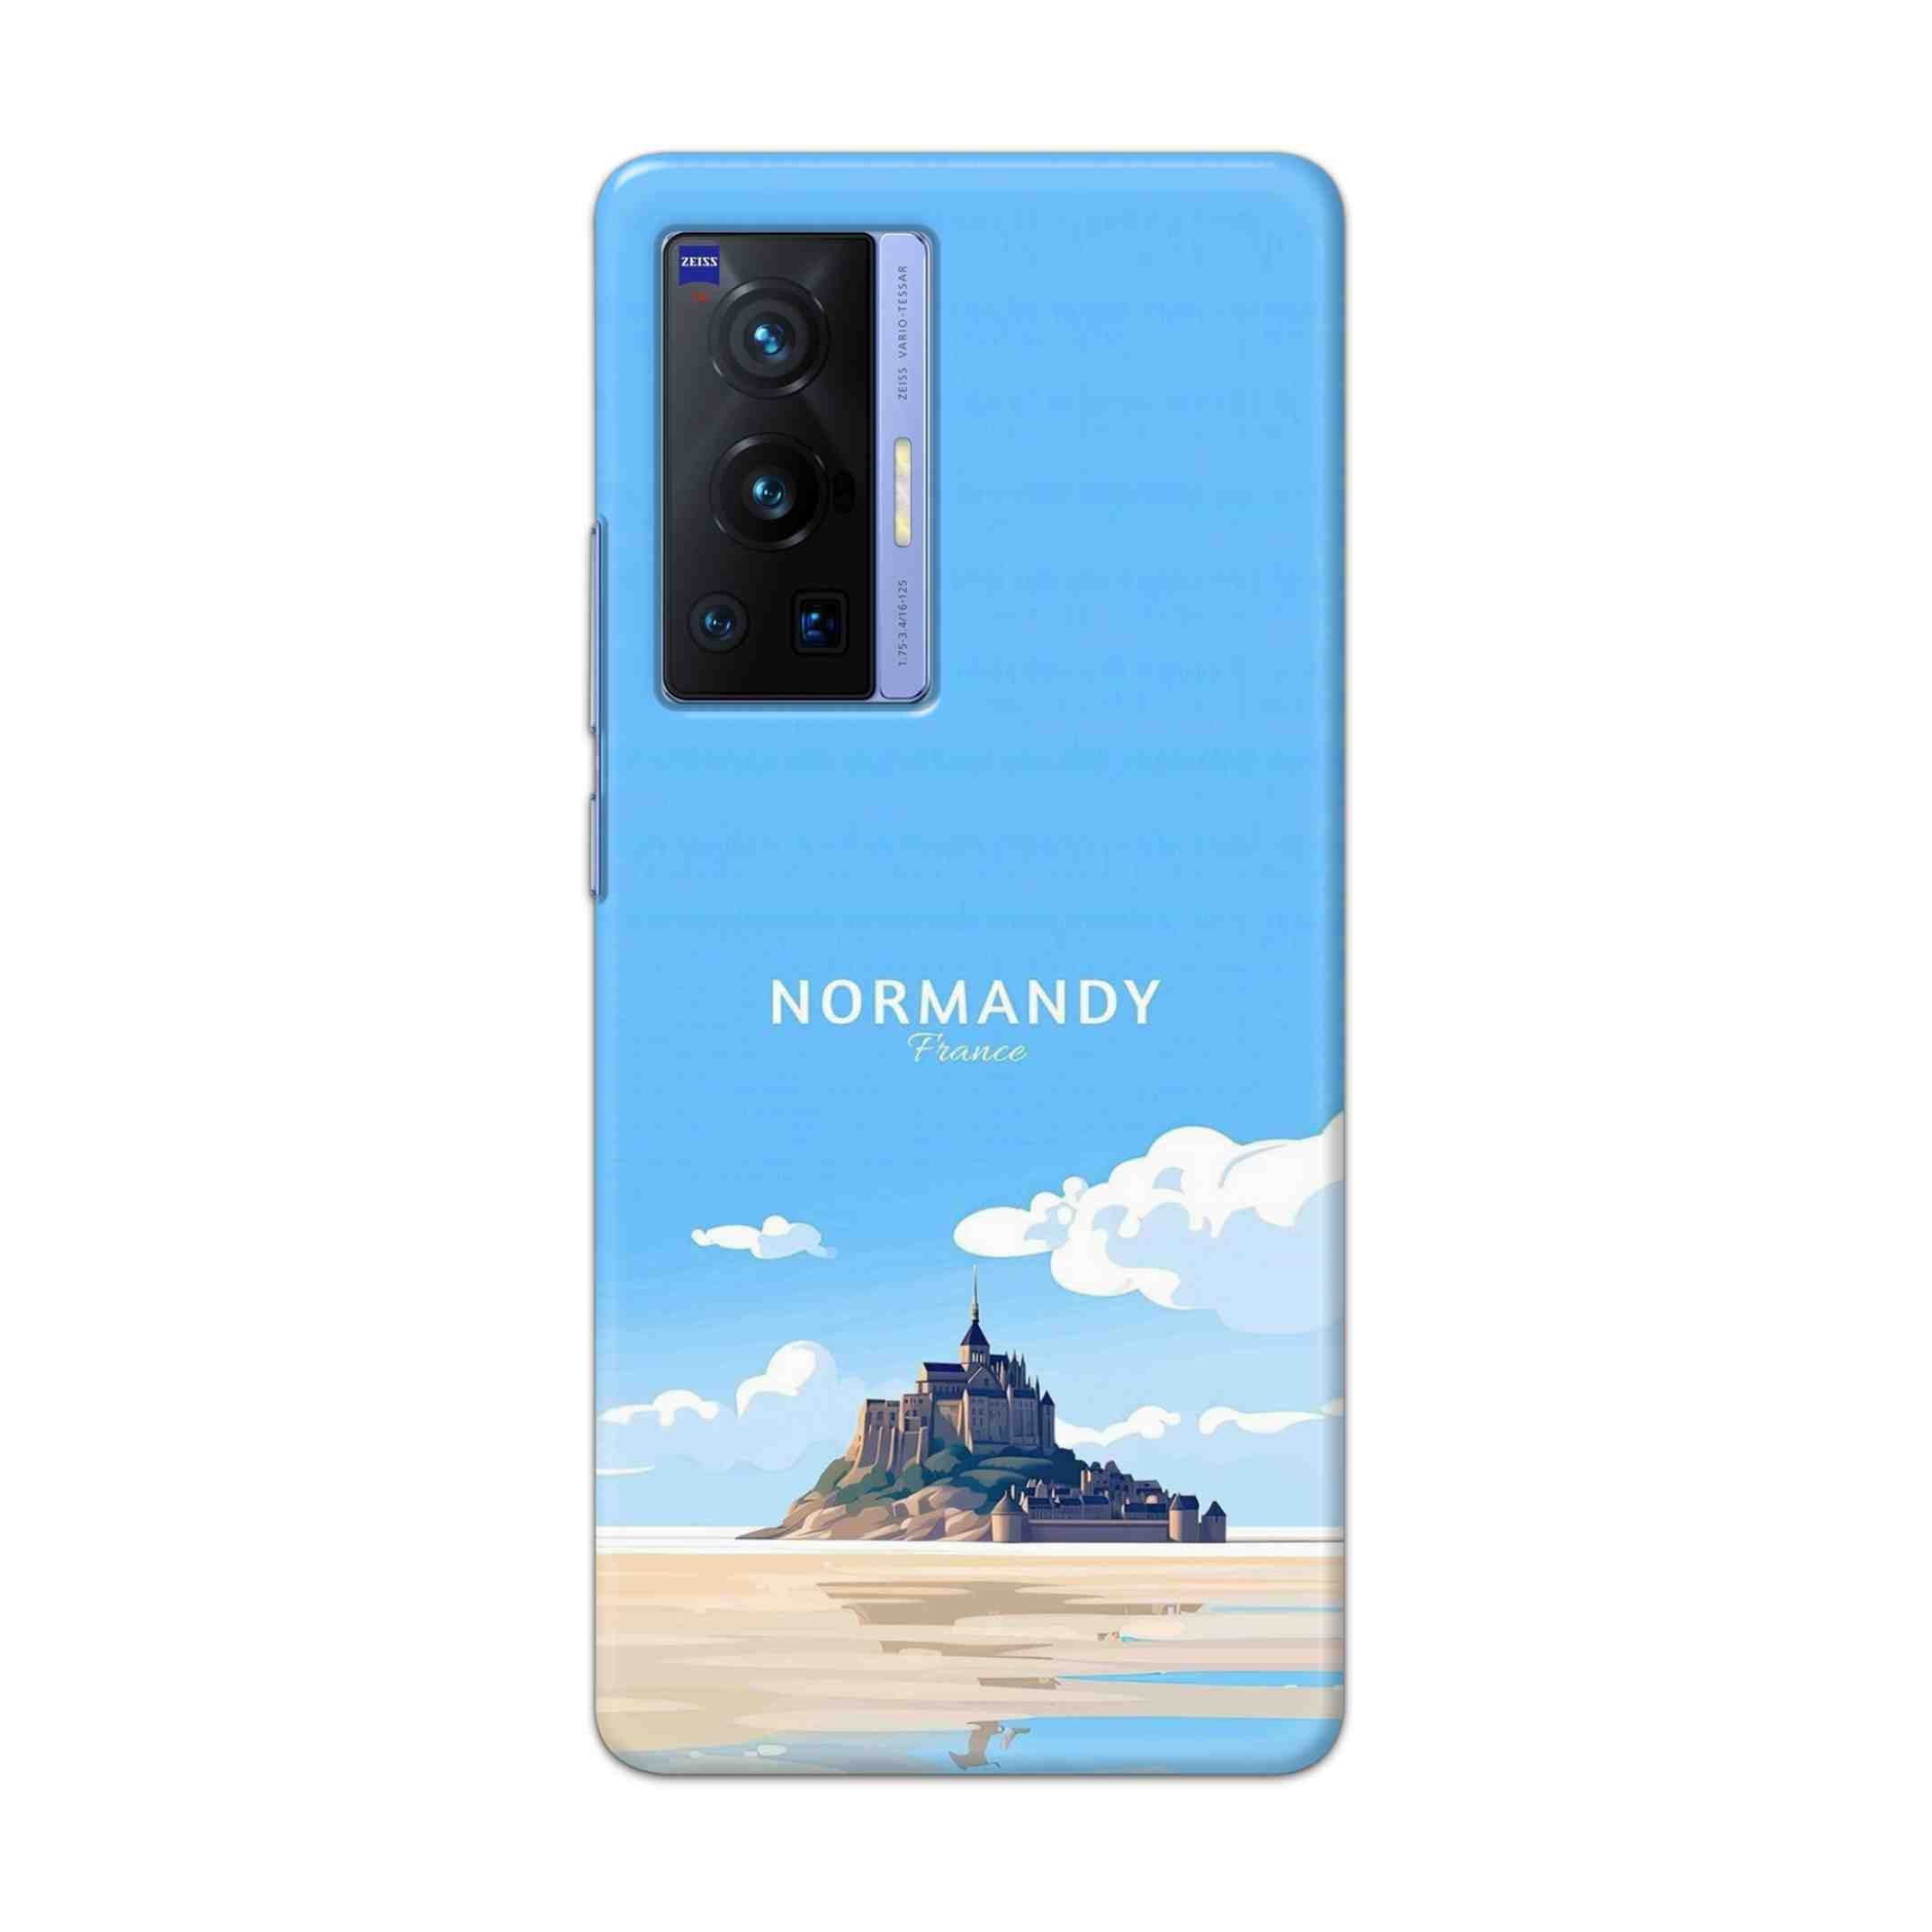 Buy Normandy Hard Back Mobile Phone Case Cover For Vivo X70 Pro Online